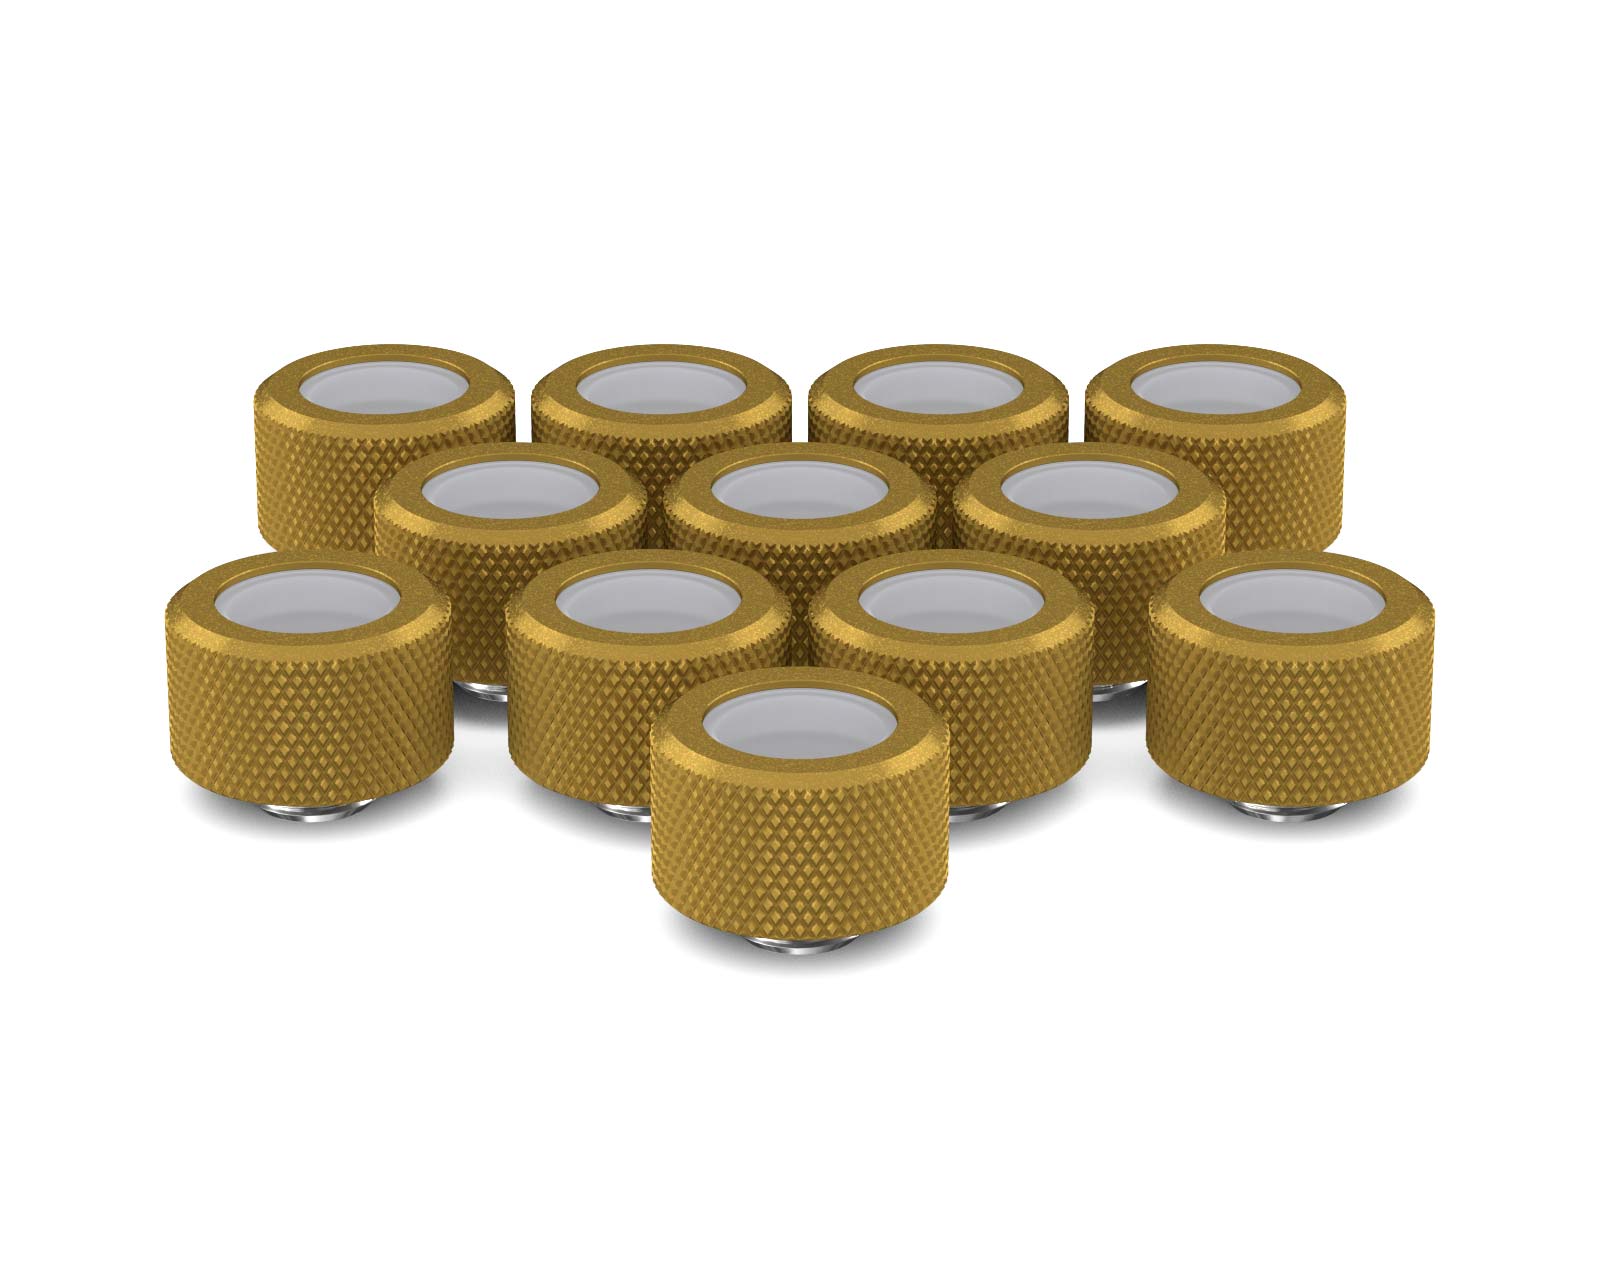 PrimoChill 16mm OD Rigid SX Fitting - 12 Pack - PrimoChill - KEEPING IT COOL Gold